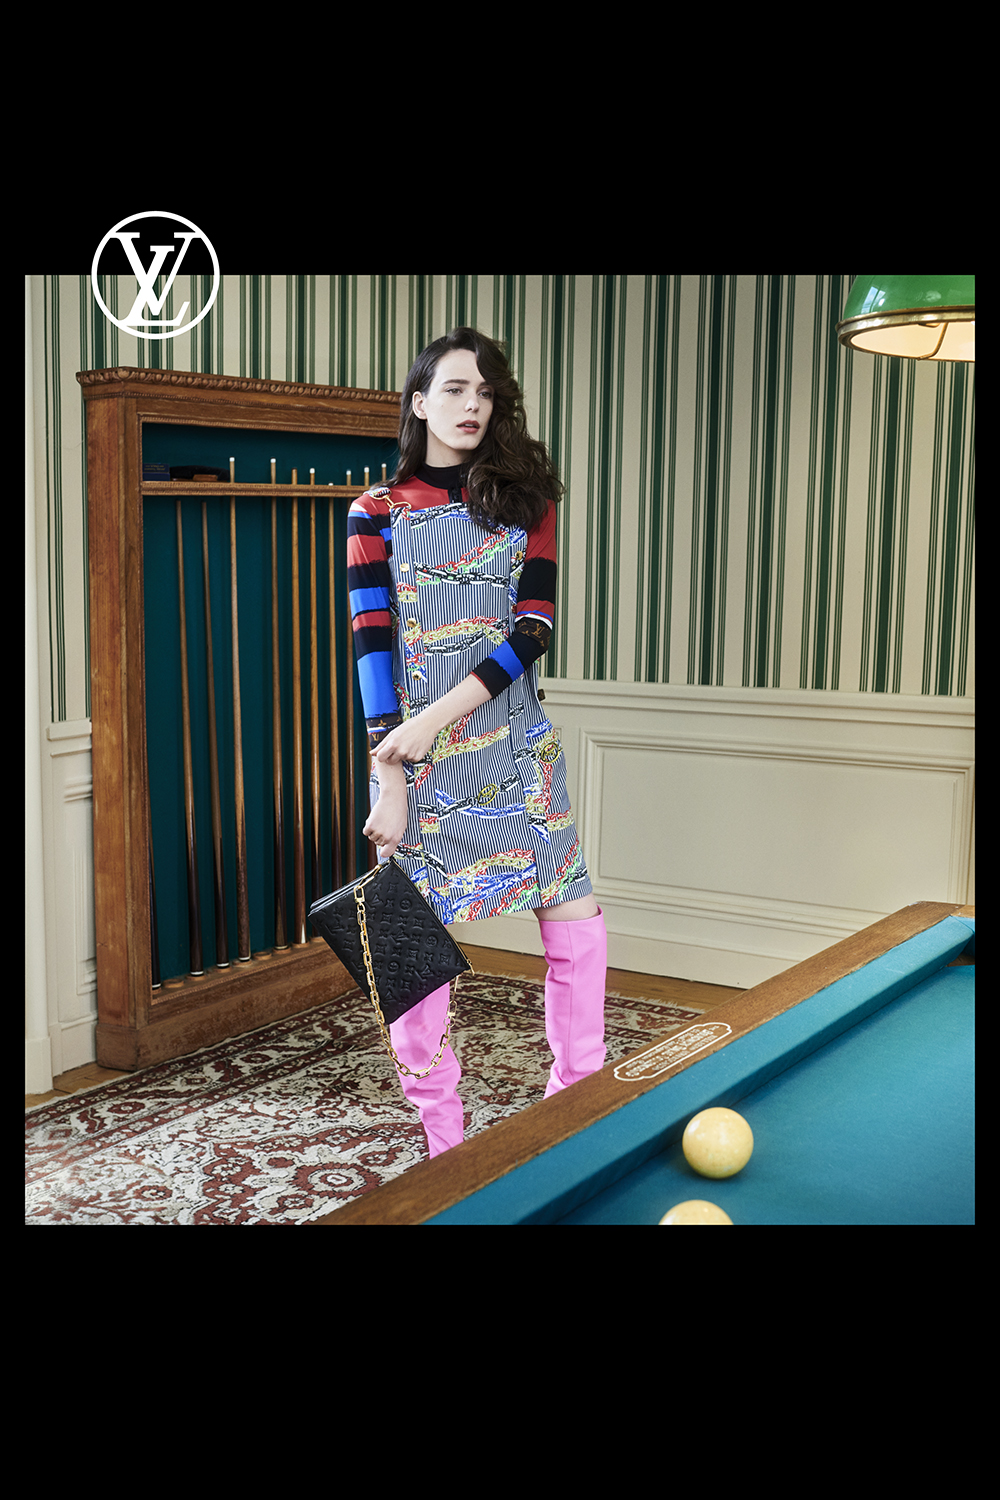 Louis Vuitton, books and posters transformed in the Pre-Fall 2020 campaign